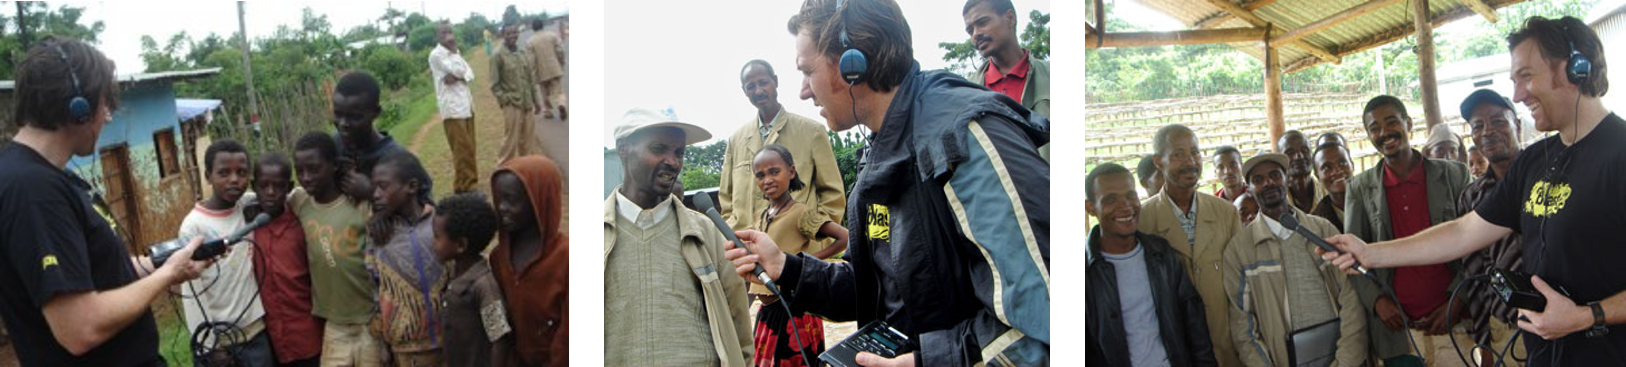 Radio is a medium that allows for almost anybody's participation. Source: RADIO FOR DEVELOPMENT (2010) 